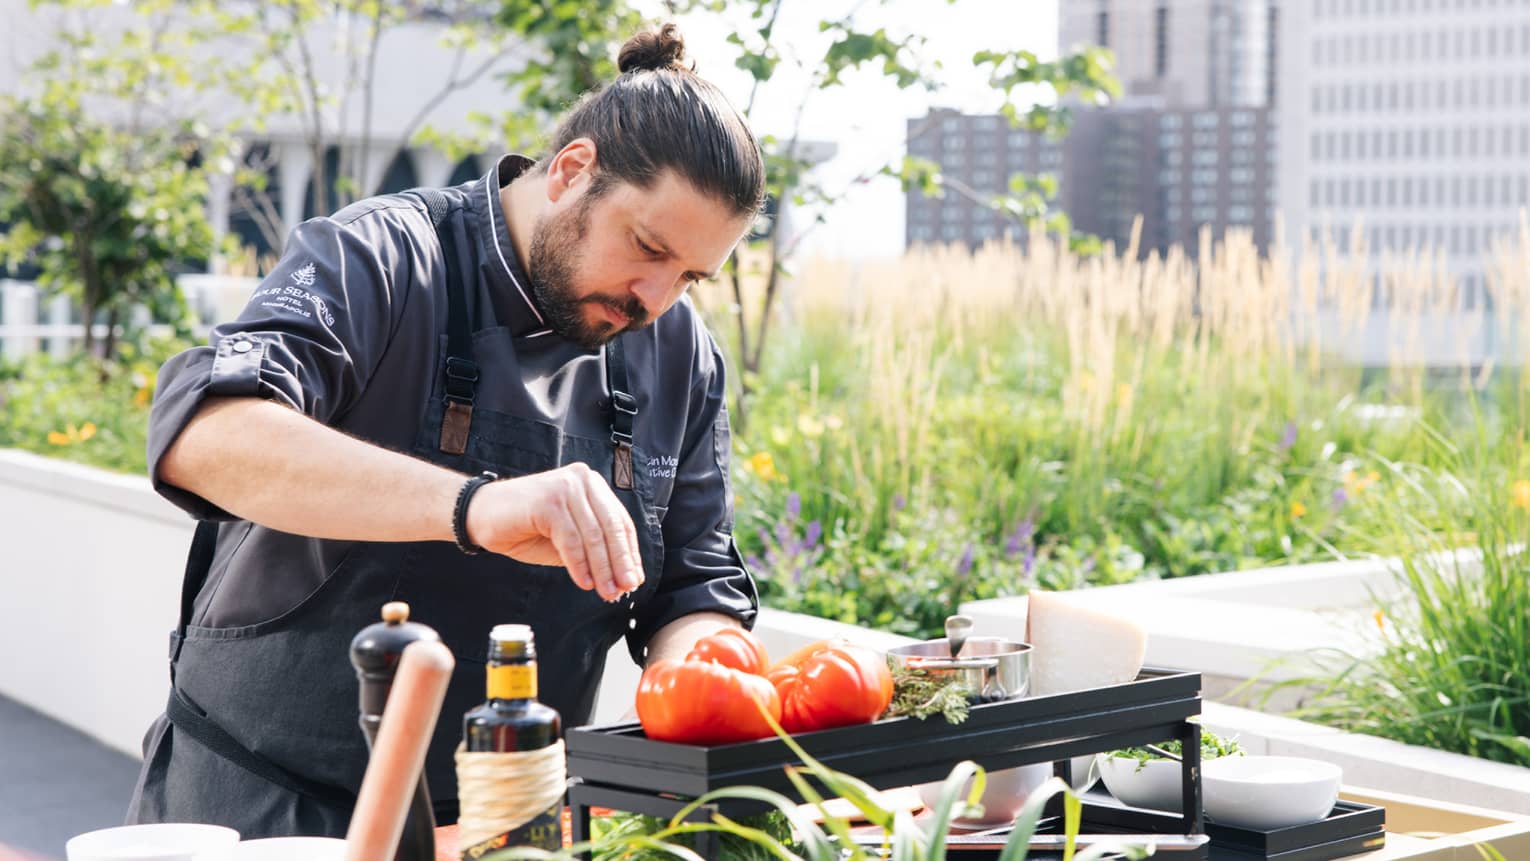 Chef Martin Morelli wears a black chef's jacket and apron as he seasons sliced tomatoes on an outdoor table surrounded by other ingredients